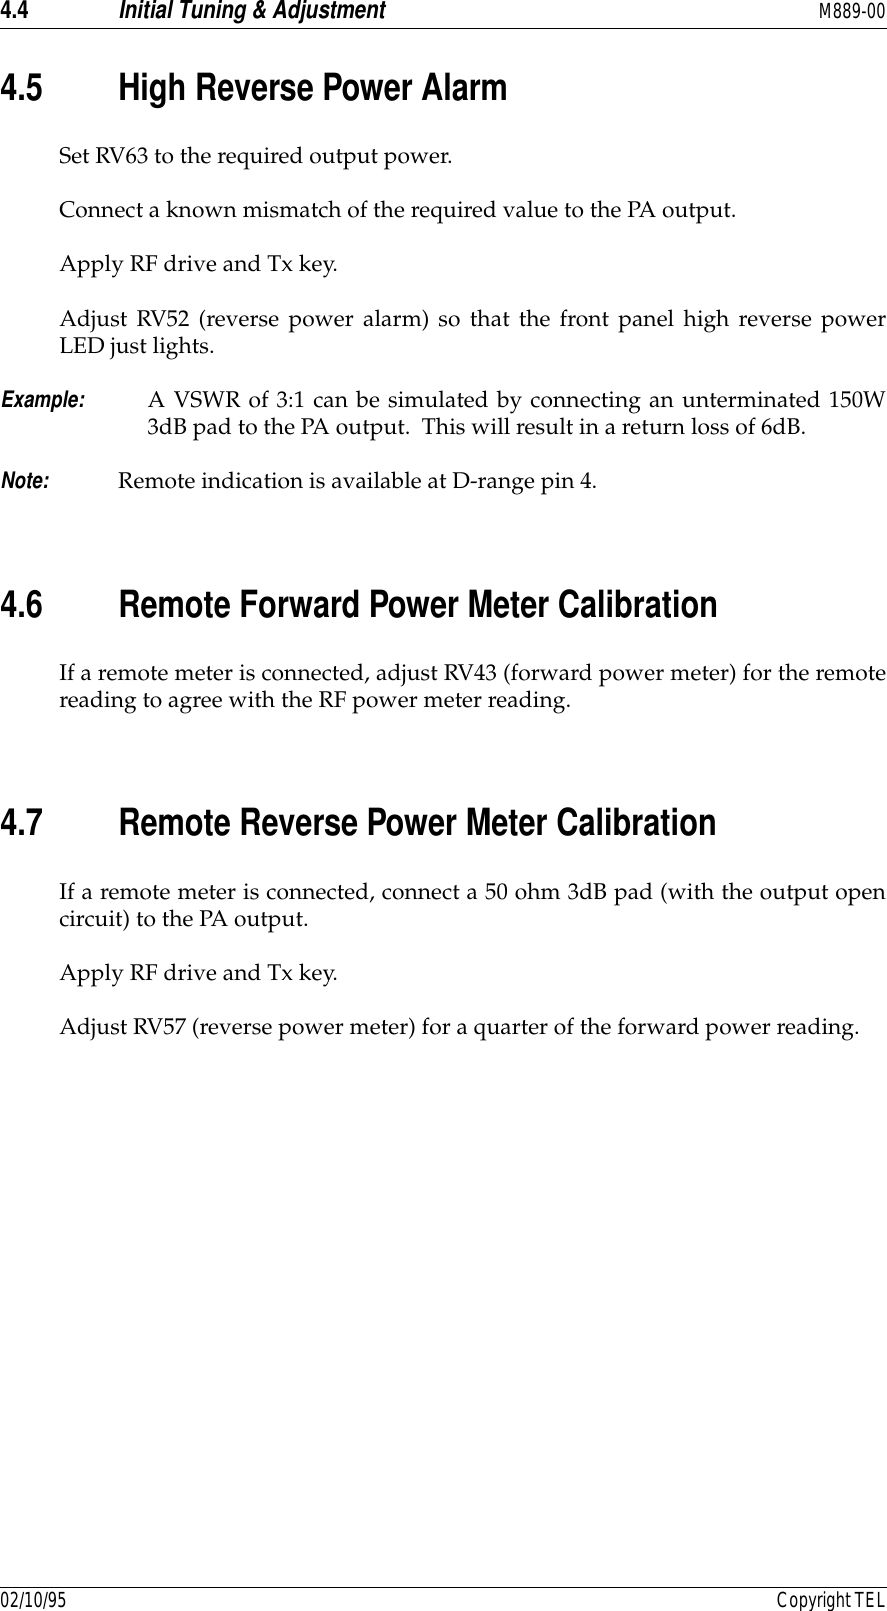 4.4 Initial Tuning &amp; Adjustment M889-0002/10/95 Copyright TEL4.5 High Reverse Power AlarmSet RV63 to the required output power.Connect a known mismatch of the required value to the PA output.Apply RF drive and Tx key.Adjust RV52 (reverse power alarm) so that the front panel high reverse powerLED just lights.Example: A VSWR of 3:1 can be simulated by connecting an unterminated 150W3dB pad to the PA output.  This will result in a return loss of 6dB.Note: Remote indication is available at D-range pin 4.4.6 Remote Forward Power Meter CalibrationIf a remote meter is connected, adjust RV43 (forward power meter) for the remotereading to agree with the RF power meter reading.4.7 Remote Reverse Power Meter CalibrationIf a remote meter is connected, connect a 50 ohm 3dB pad (with the output opencircuit) to the PA output.Apply RF drive and Tx key.Adjust RV57 (reverse power meter) for a quarter of the forward power reading.